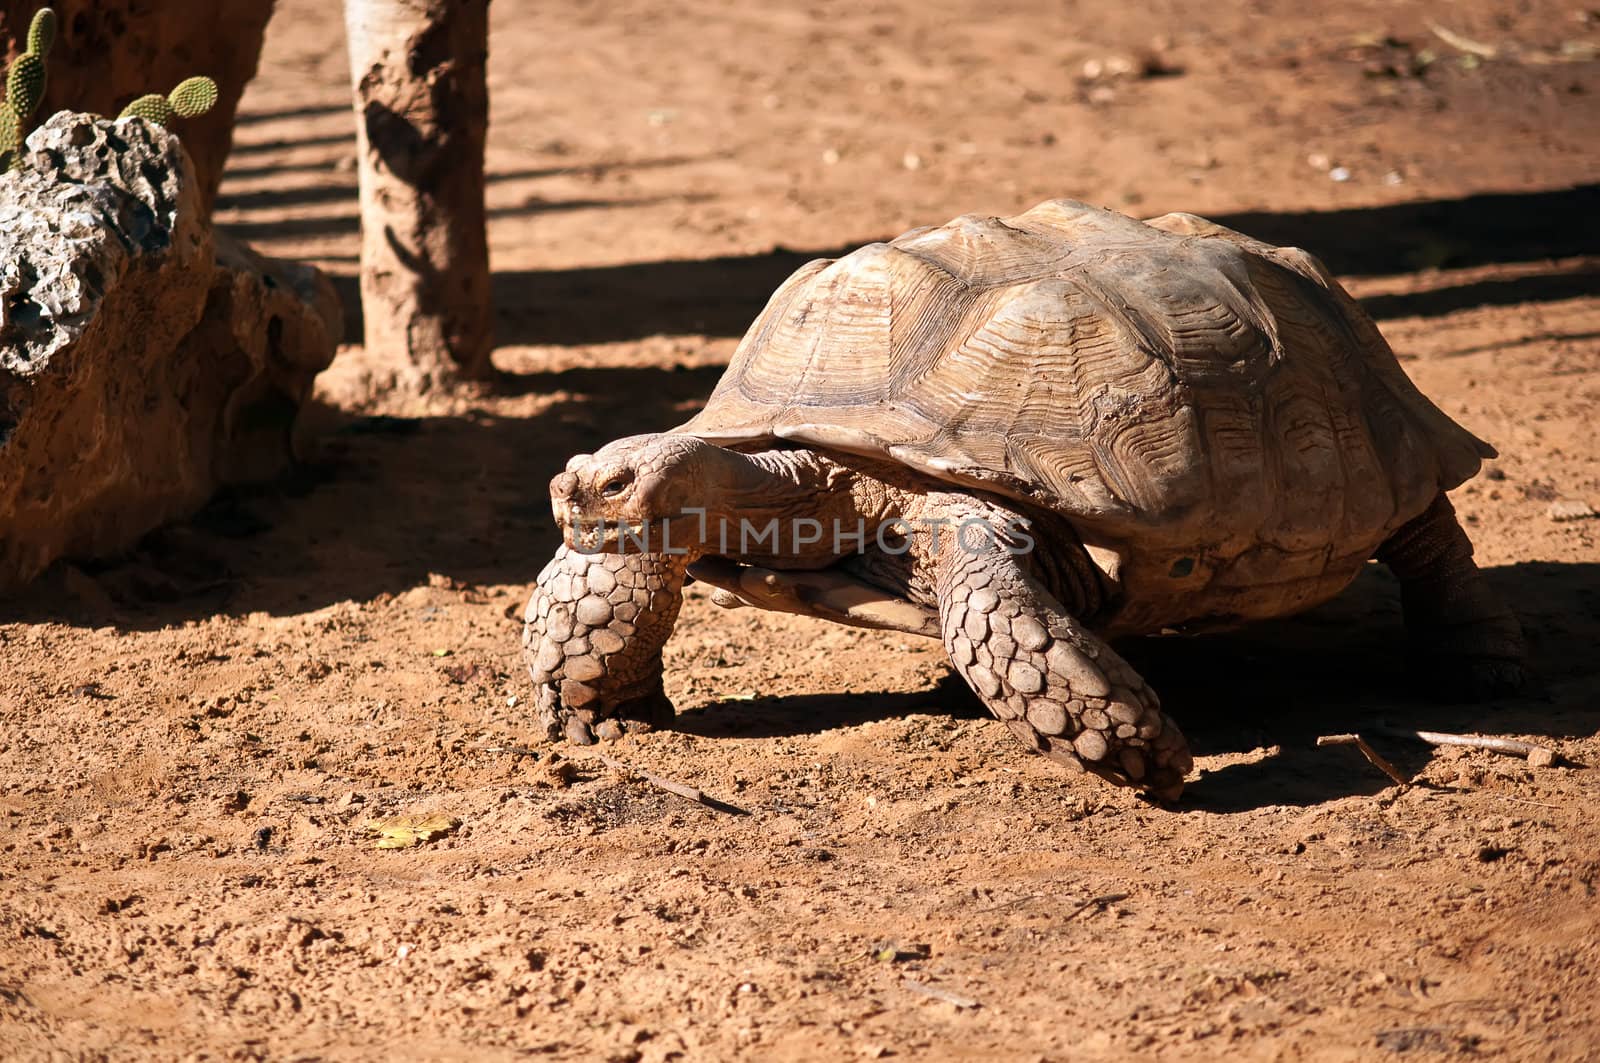 African spurred tortoise (Geochelone sulcata), also called the African spur thigh tortoise  or the sulcata tortoise, is a species of tortoise which inhabits the southern edge of the Sahara desert, in northern Africa.